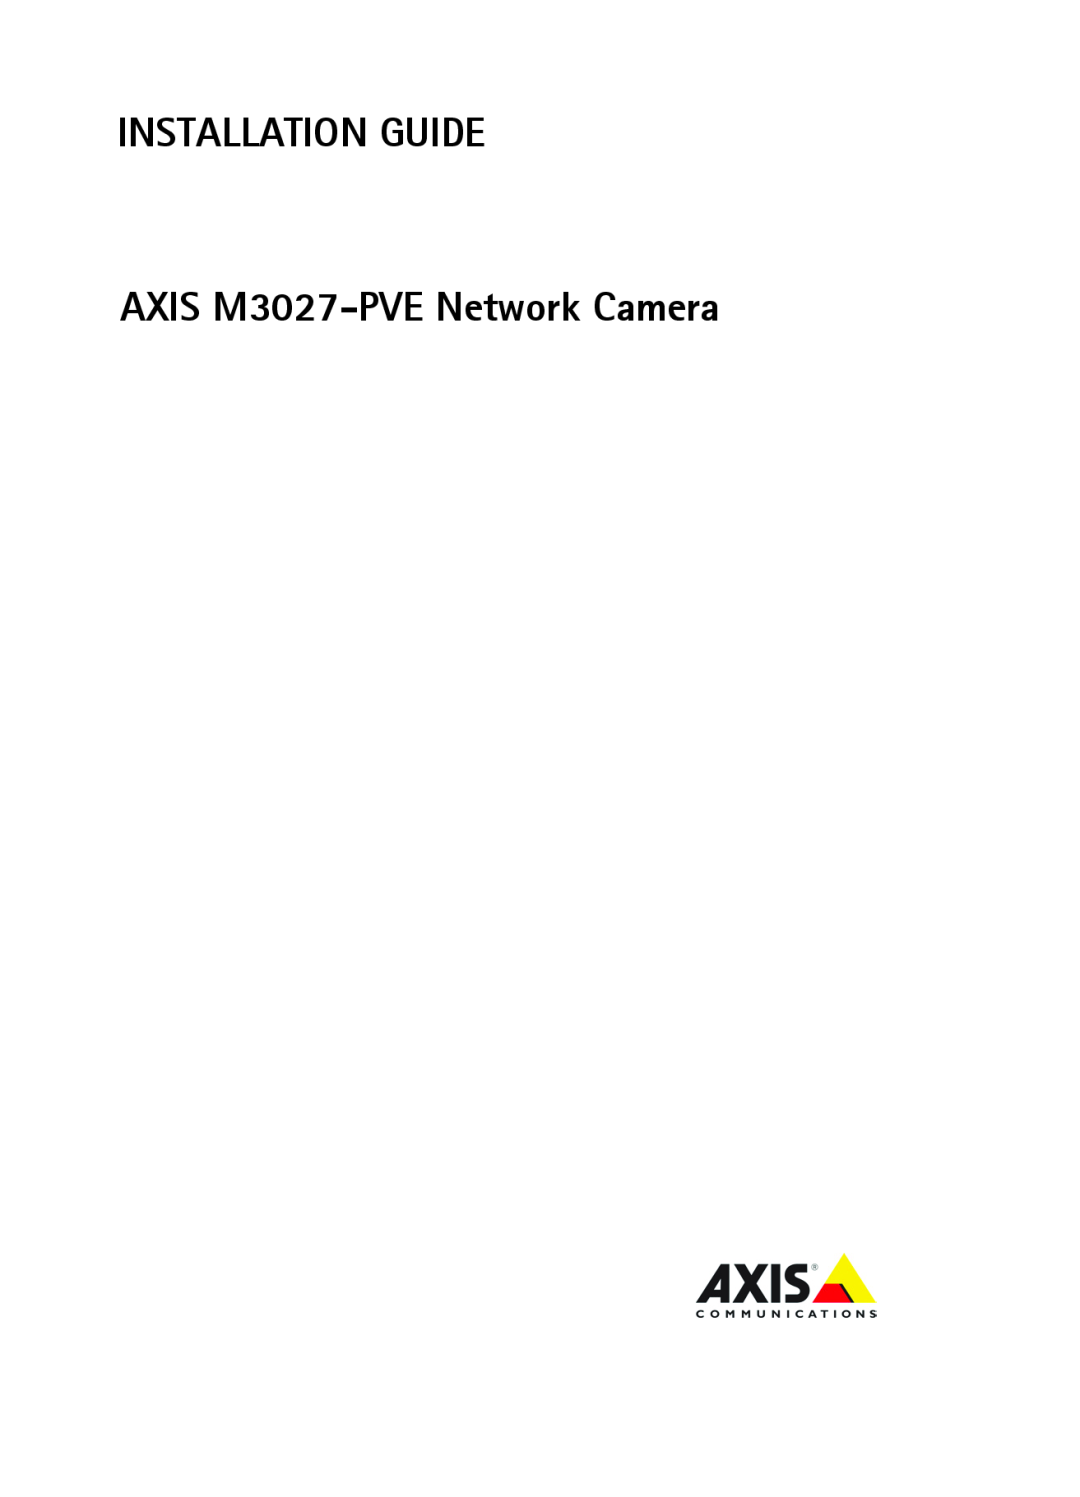 Axis Communications axis network camera manual INSTALLATION GUIDE AXIS M3027-PVE Network Camera 